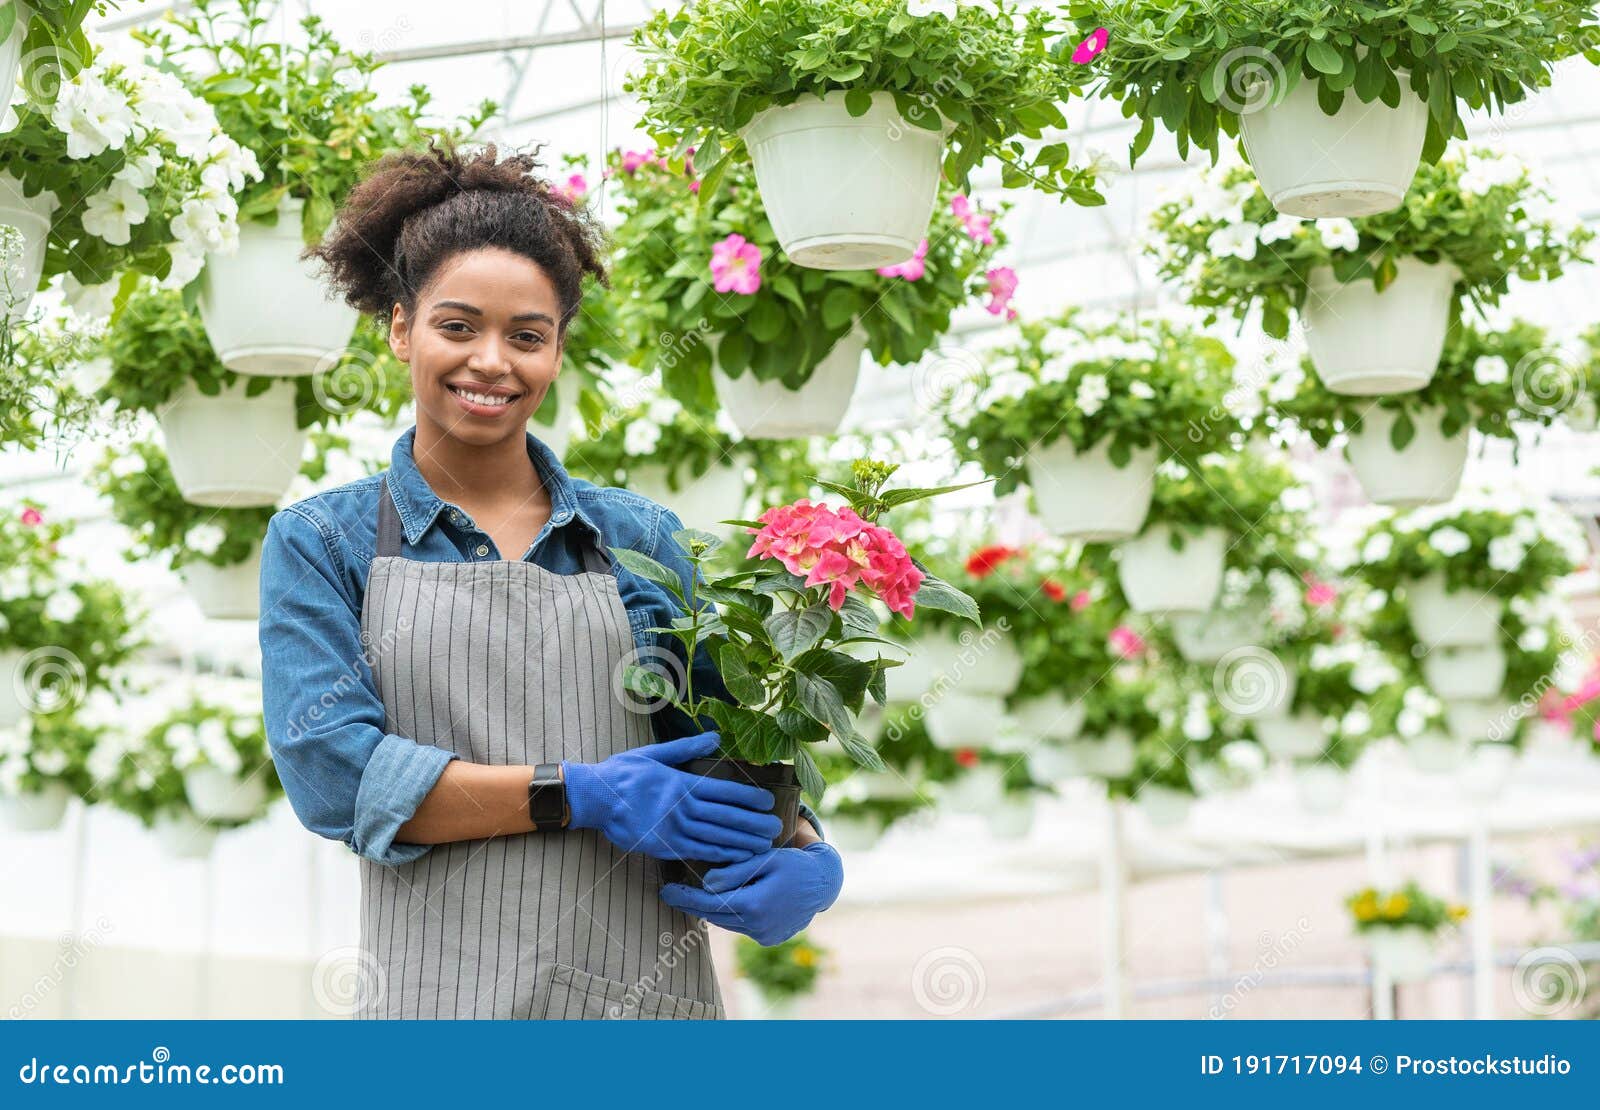 Happy Woman Planting Flowers At Her Backyard Stock Photo